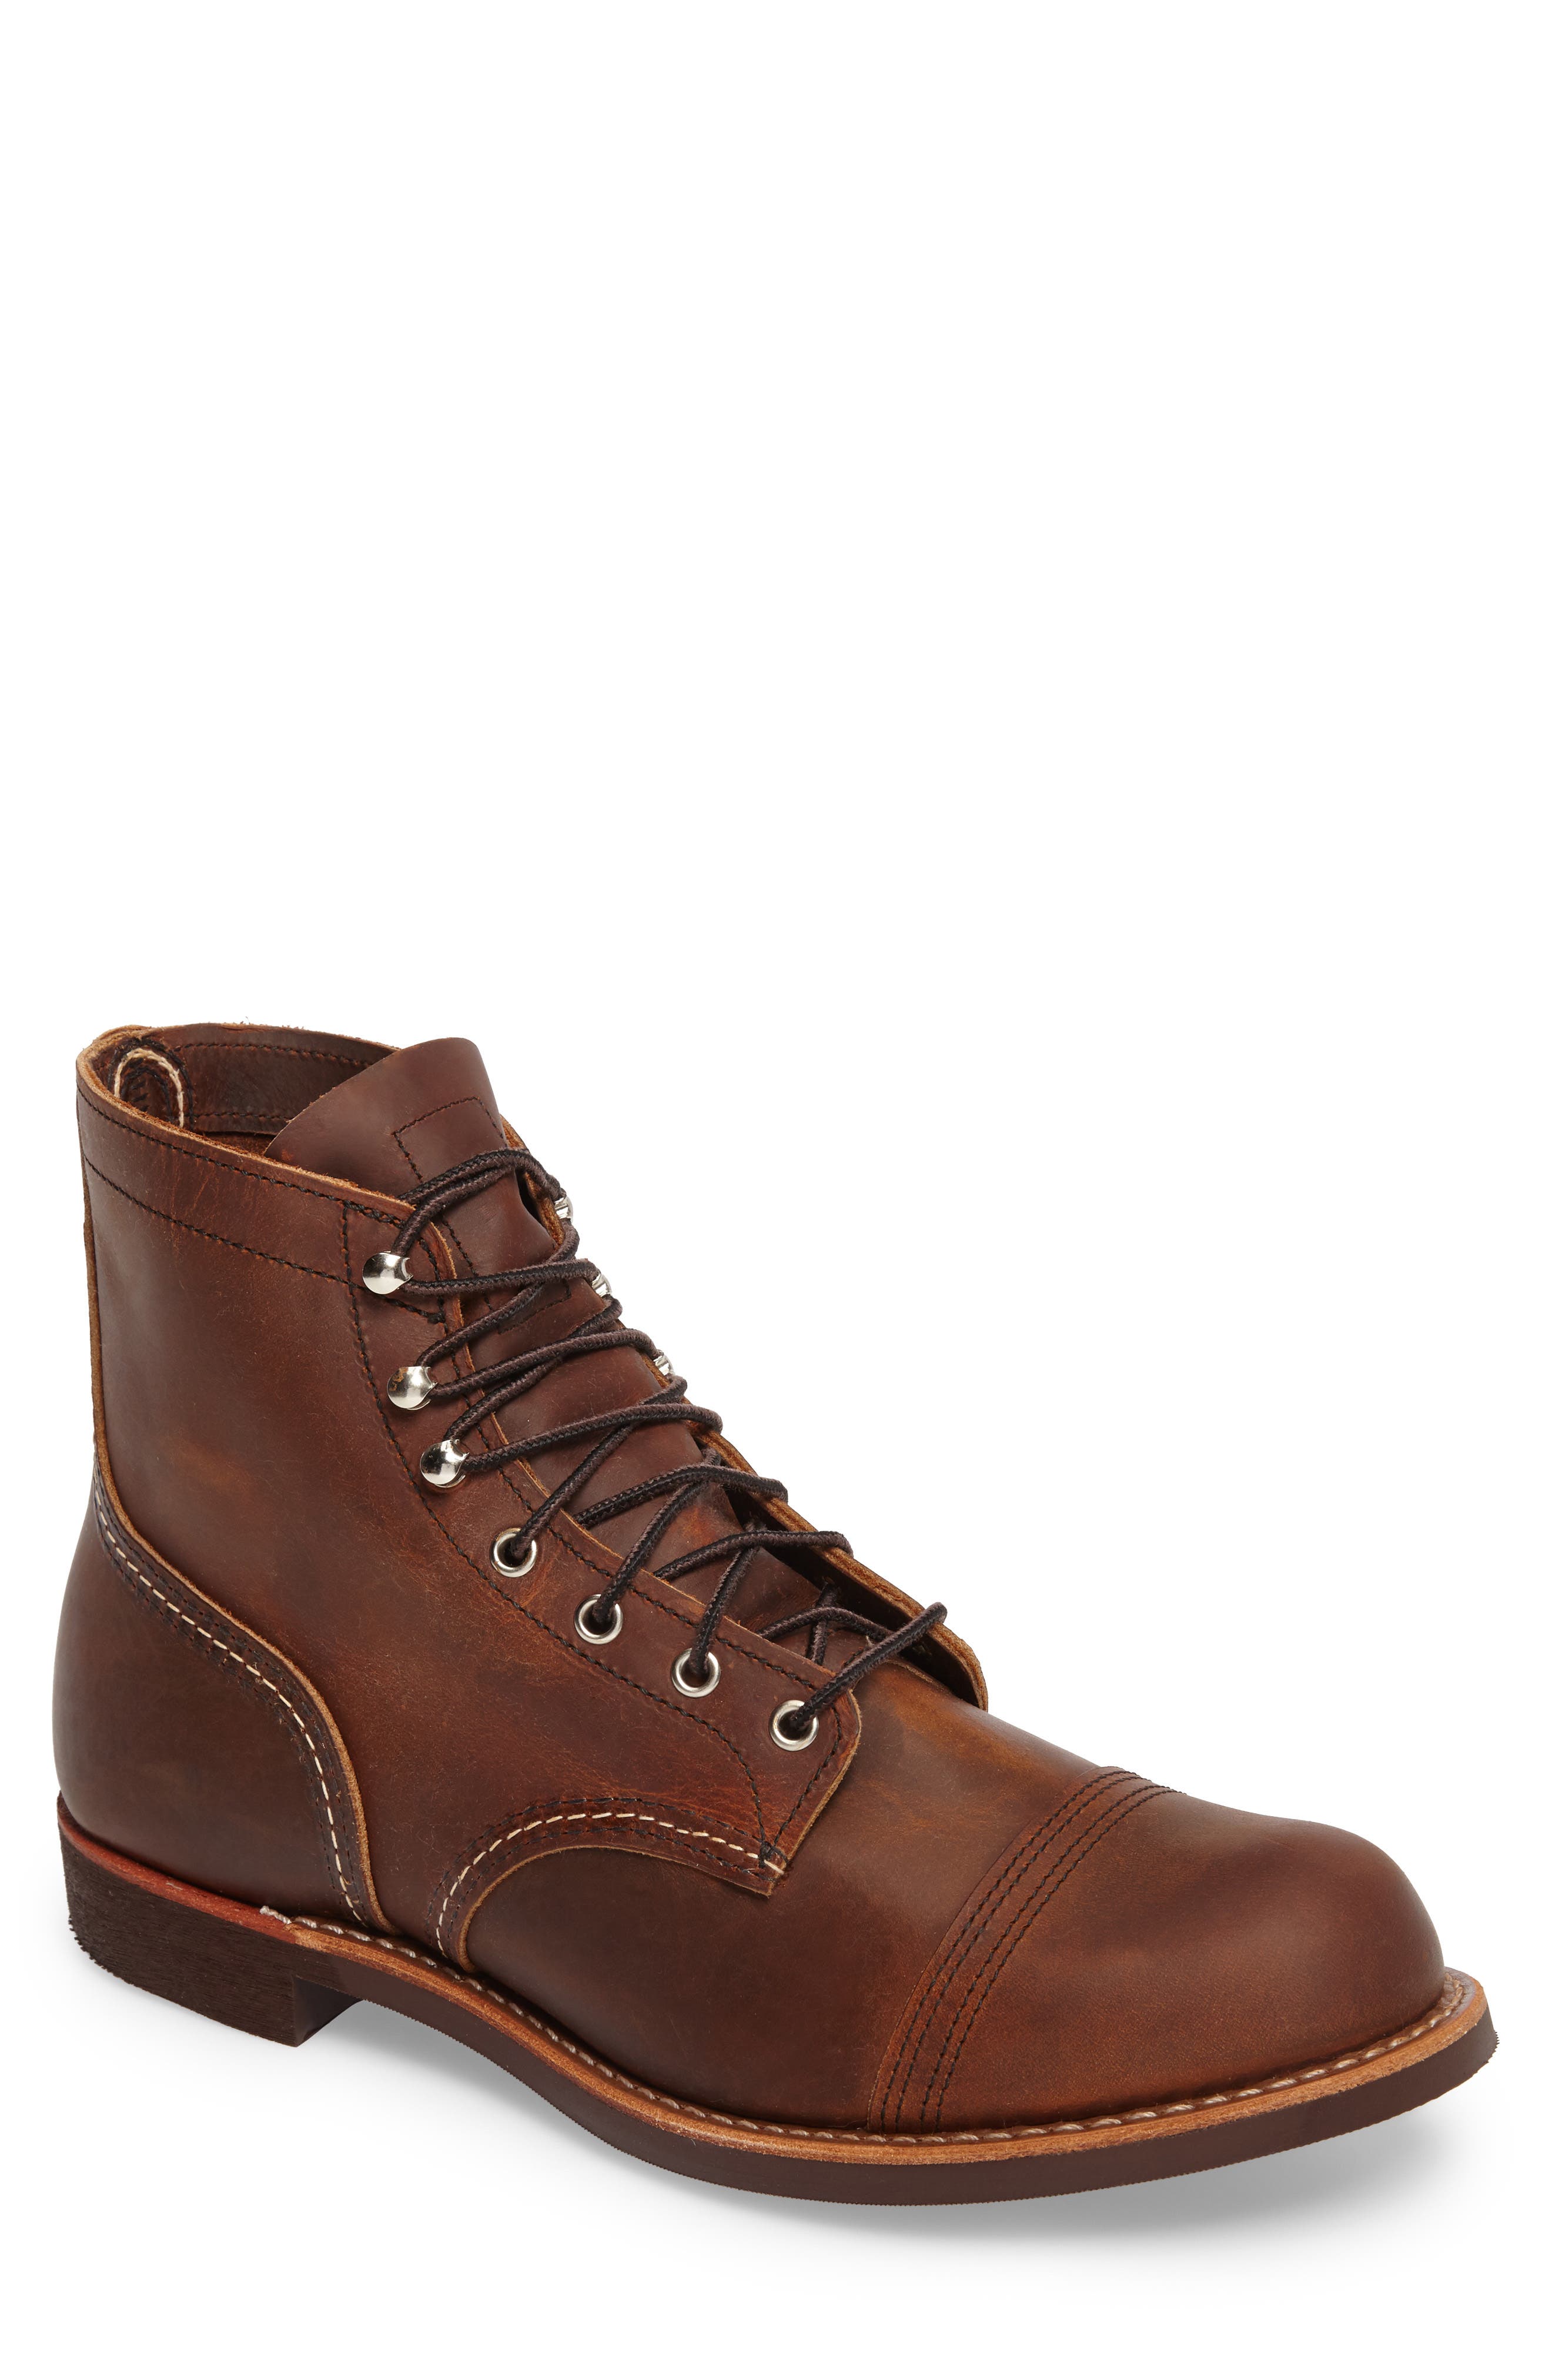 red wing shoes online store